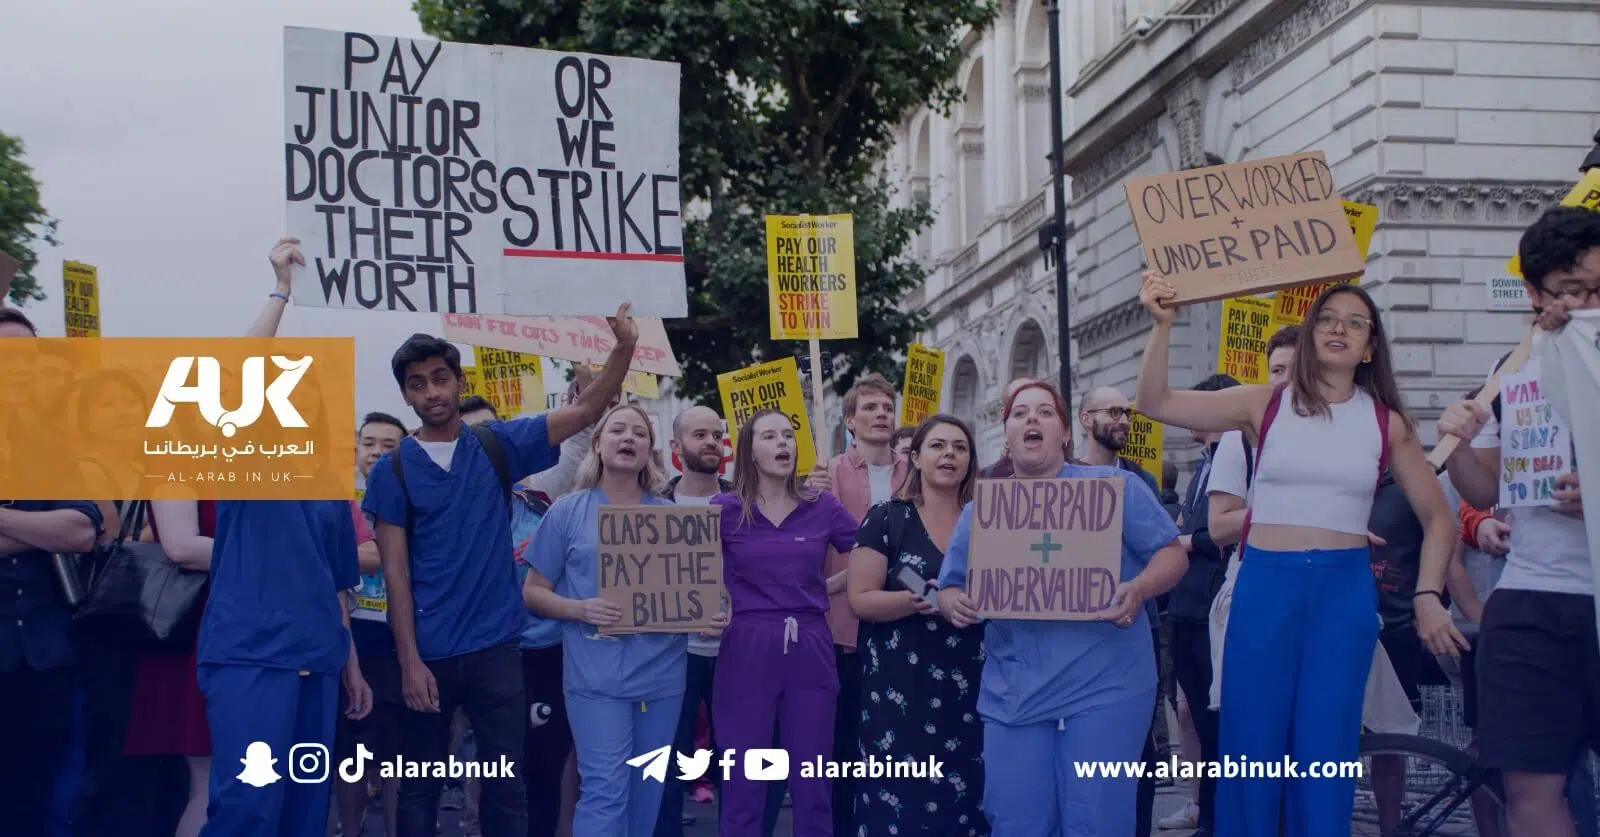 Upcoming Strike Dates Revealed by Junior Doctors